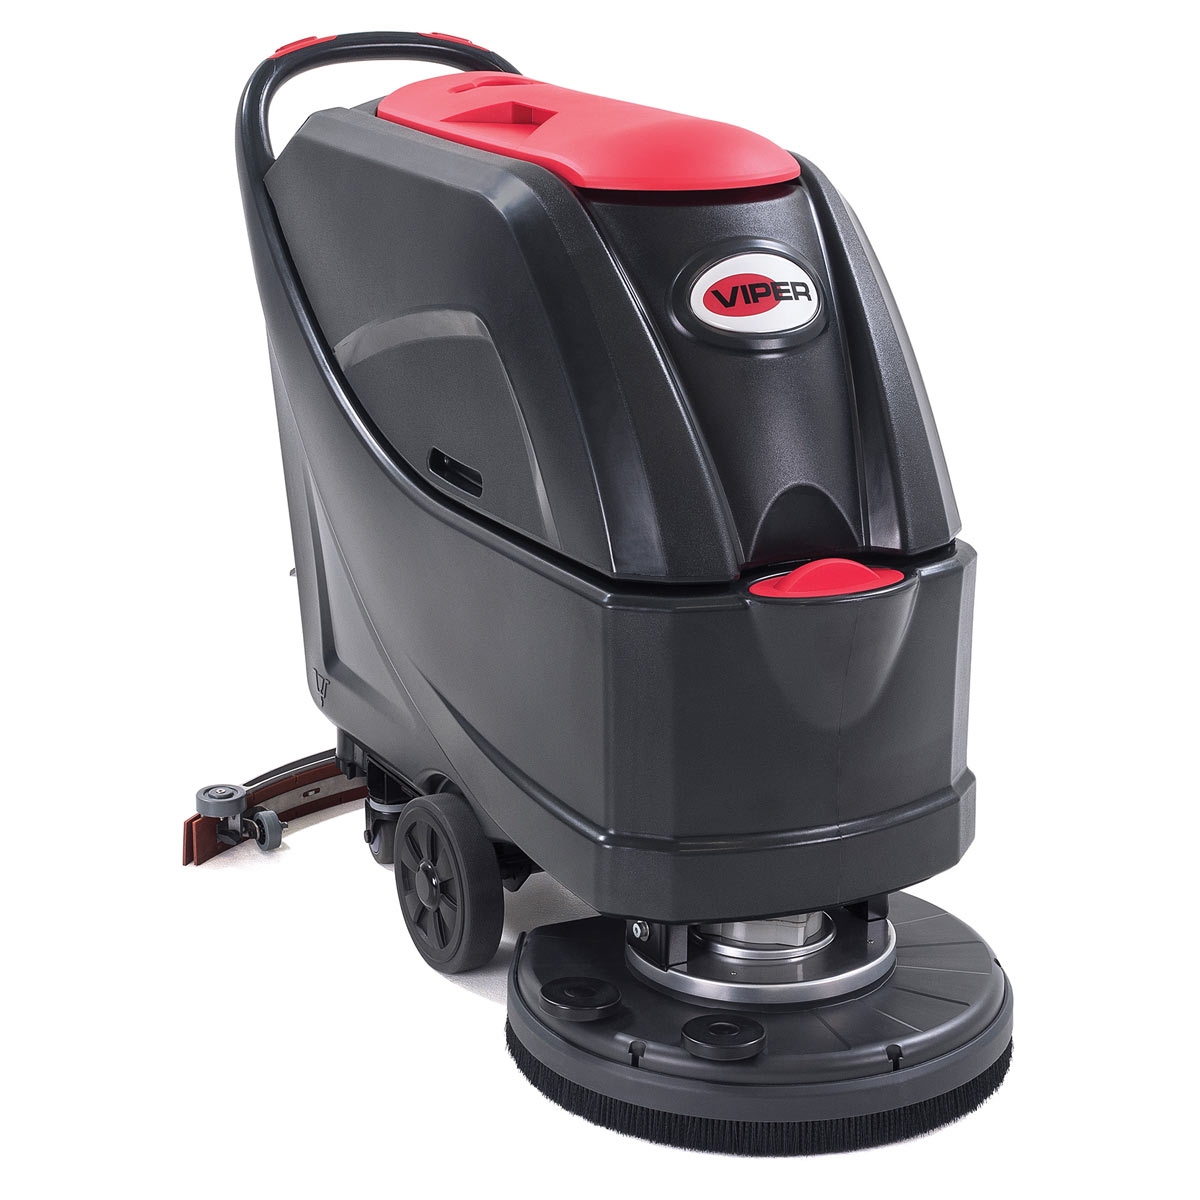 Electric Walk Behind Auto Floor Scrubber, 18 Cleaning Path